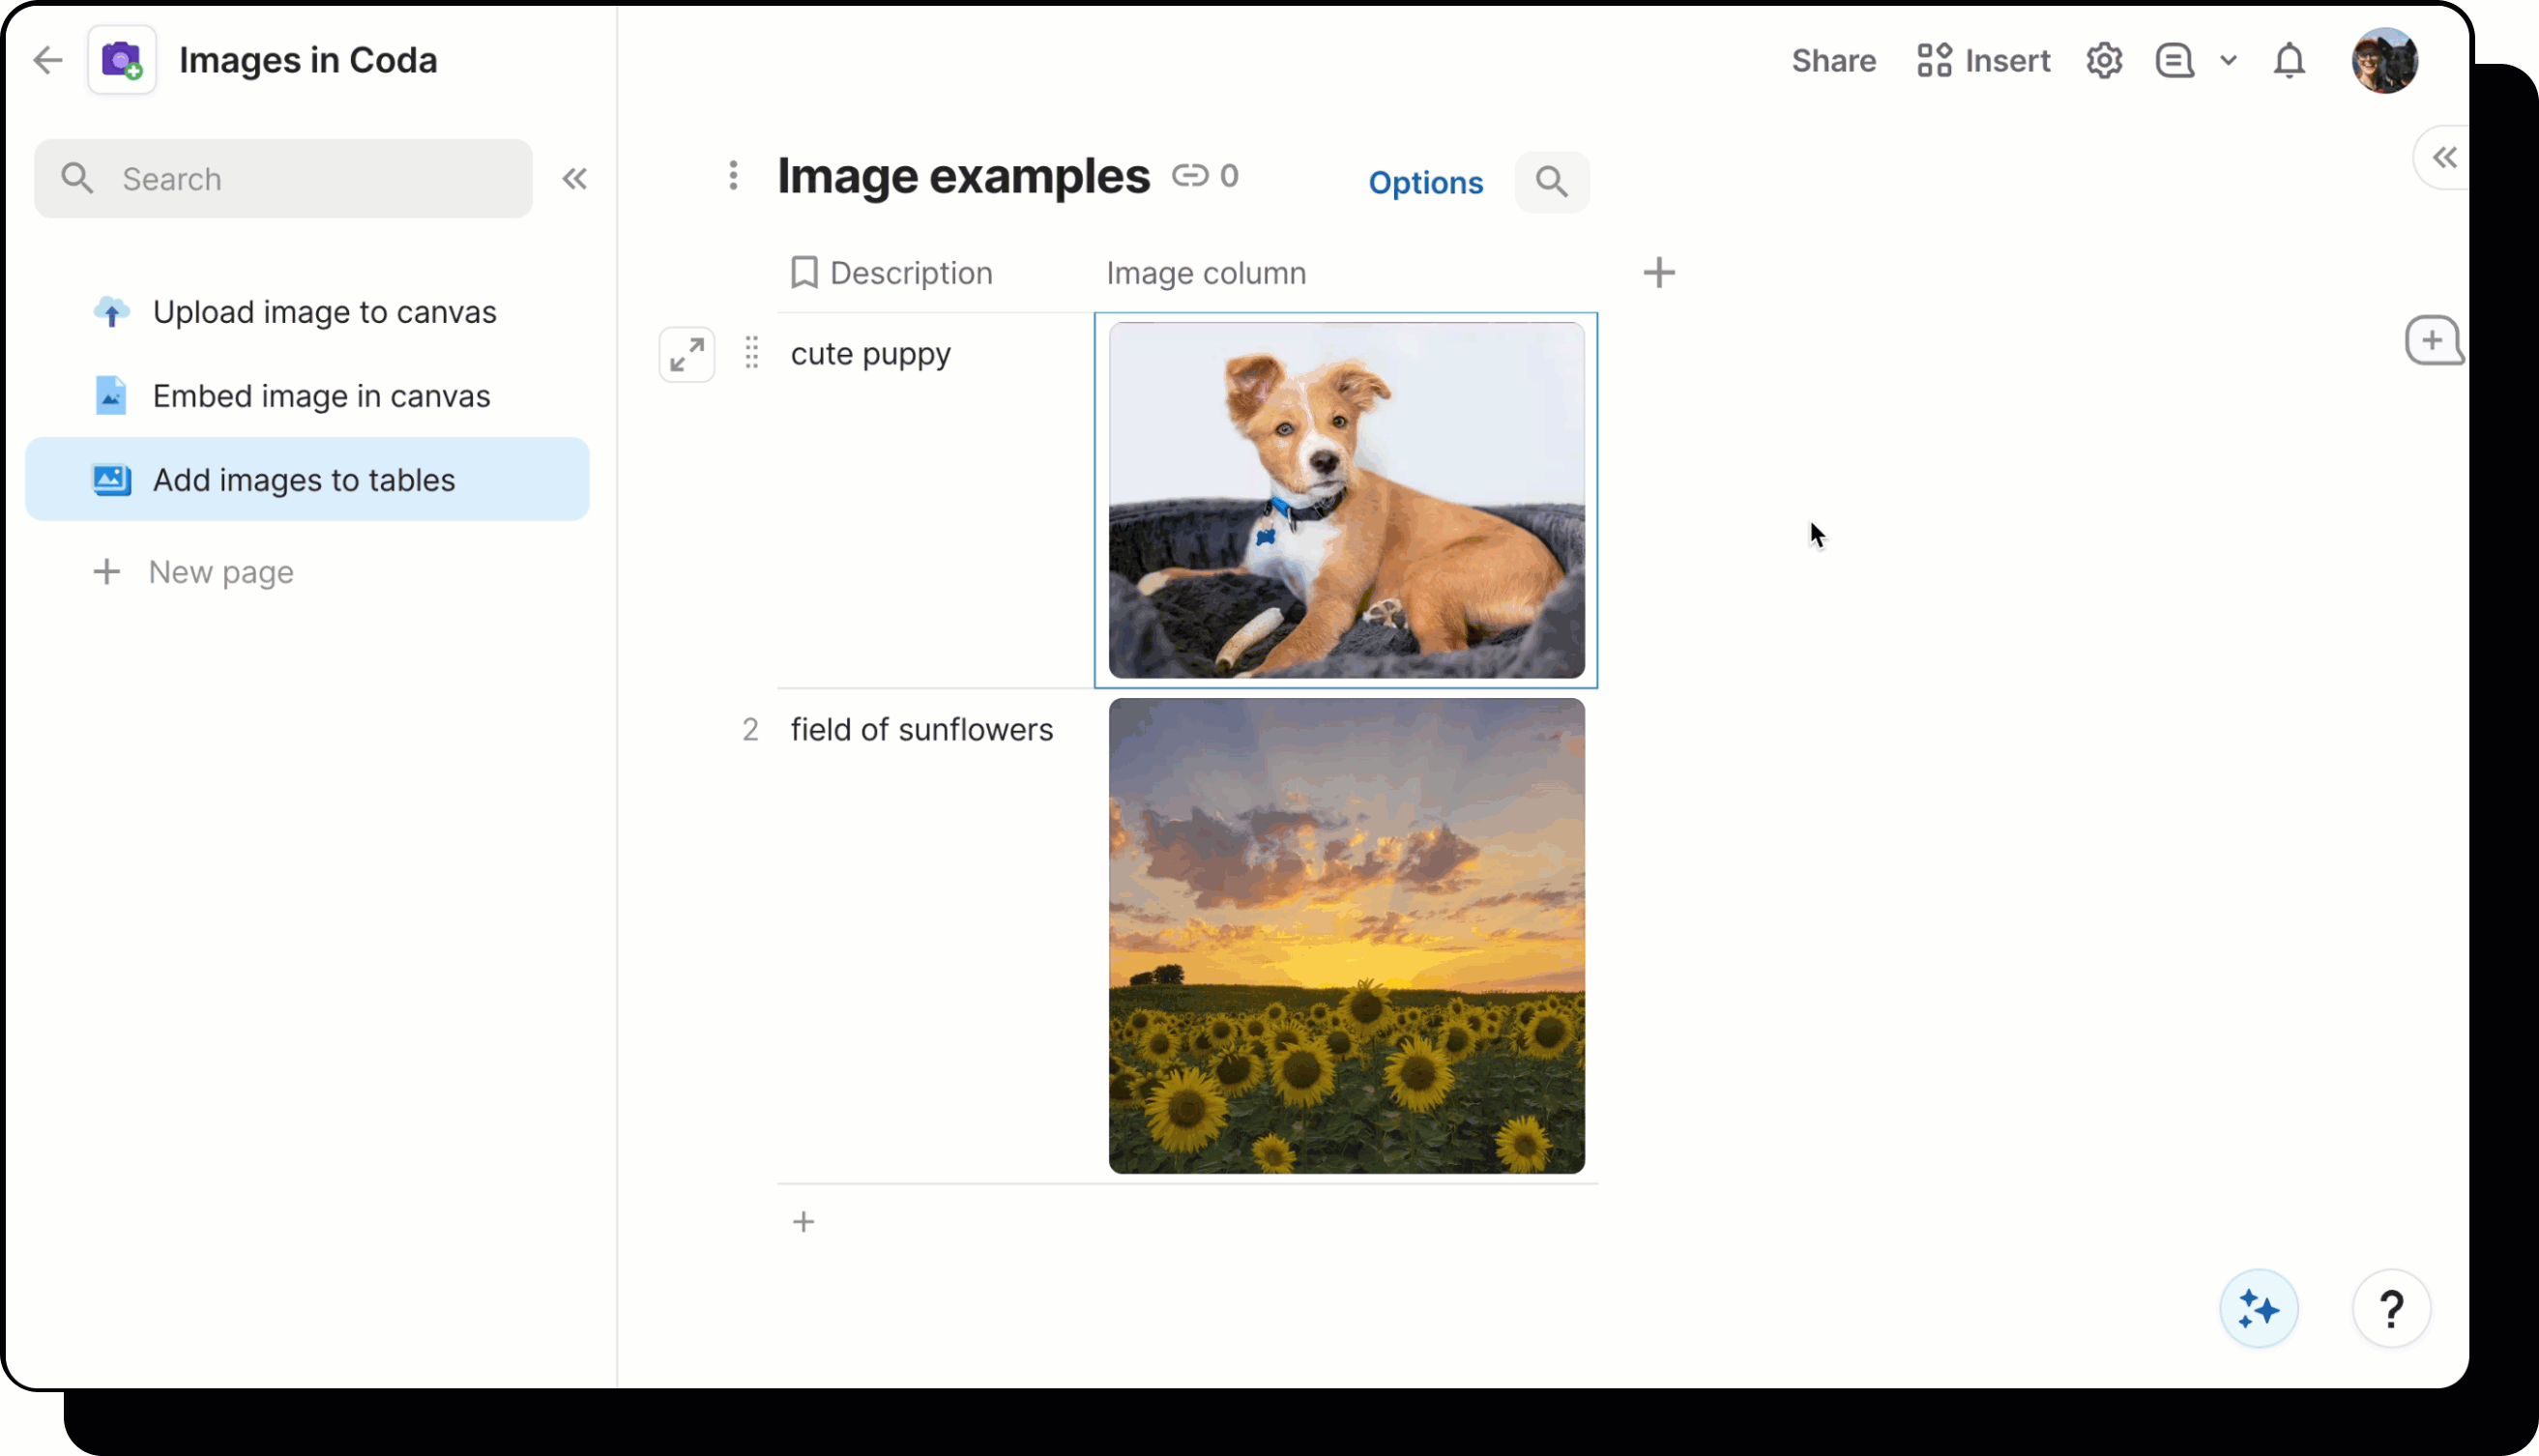 add alt text to image.gif